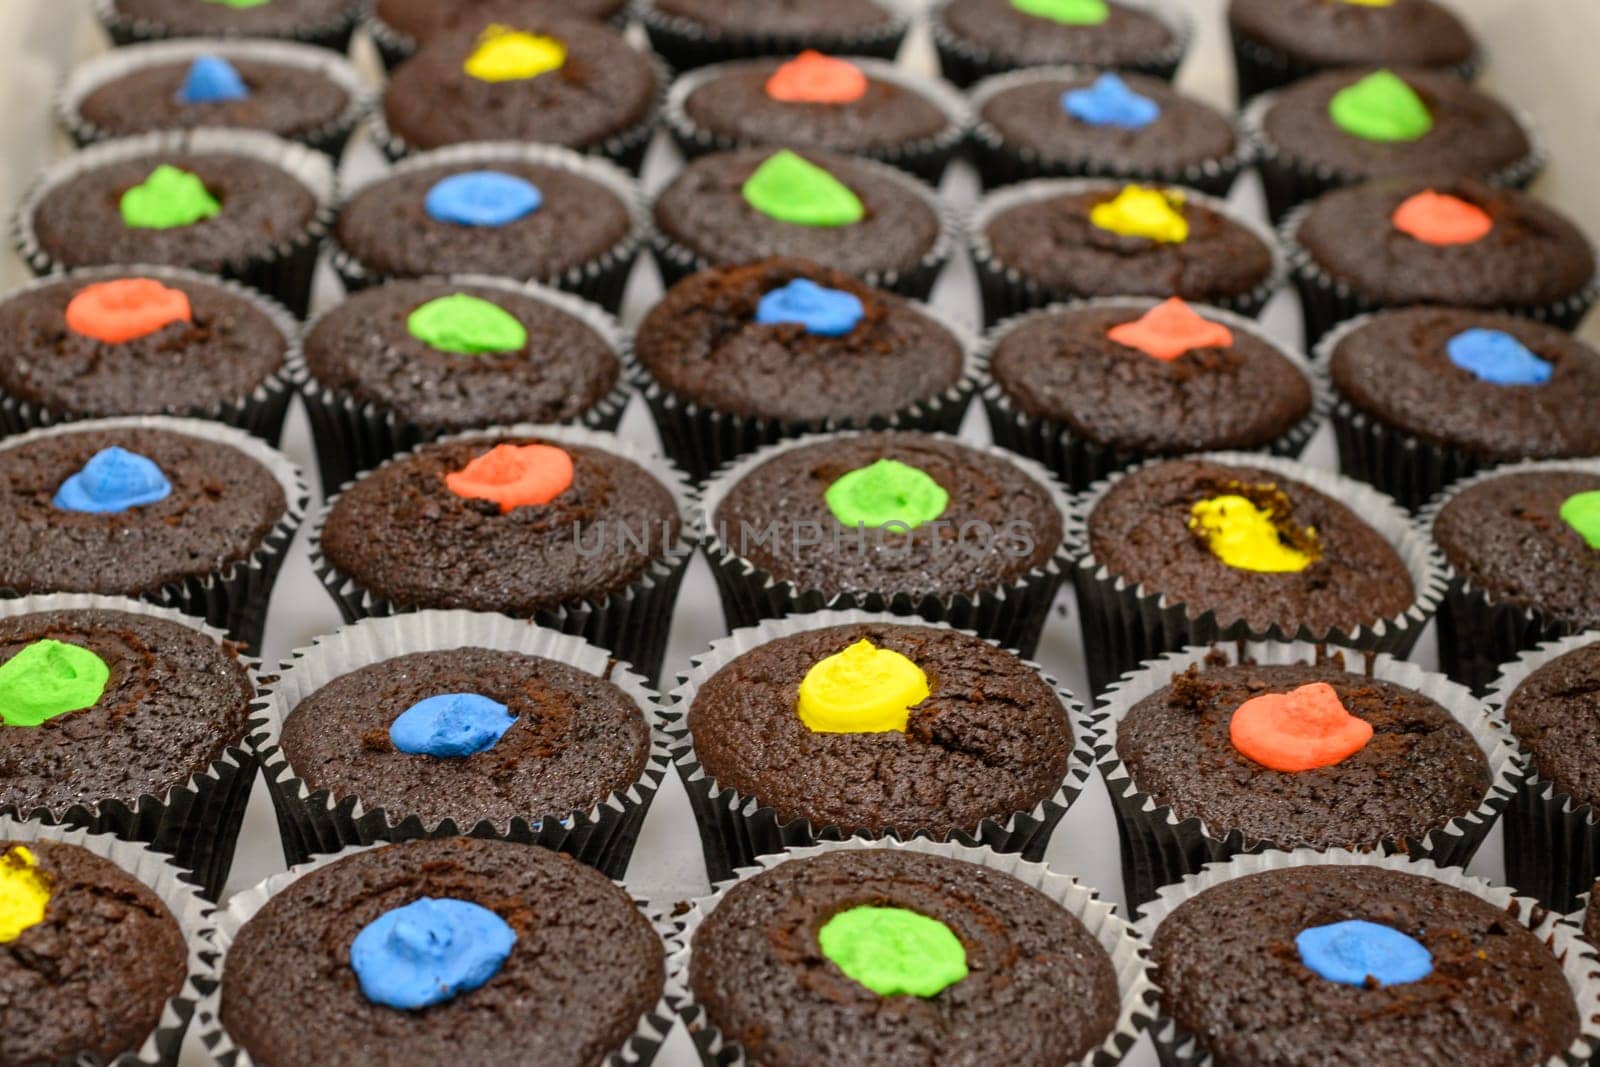 multi color muffins produce at professional catering baker in professional kitchen